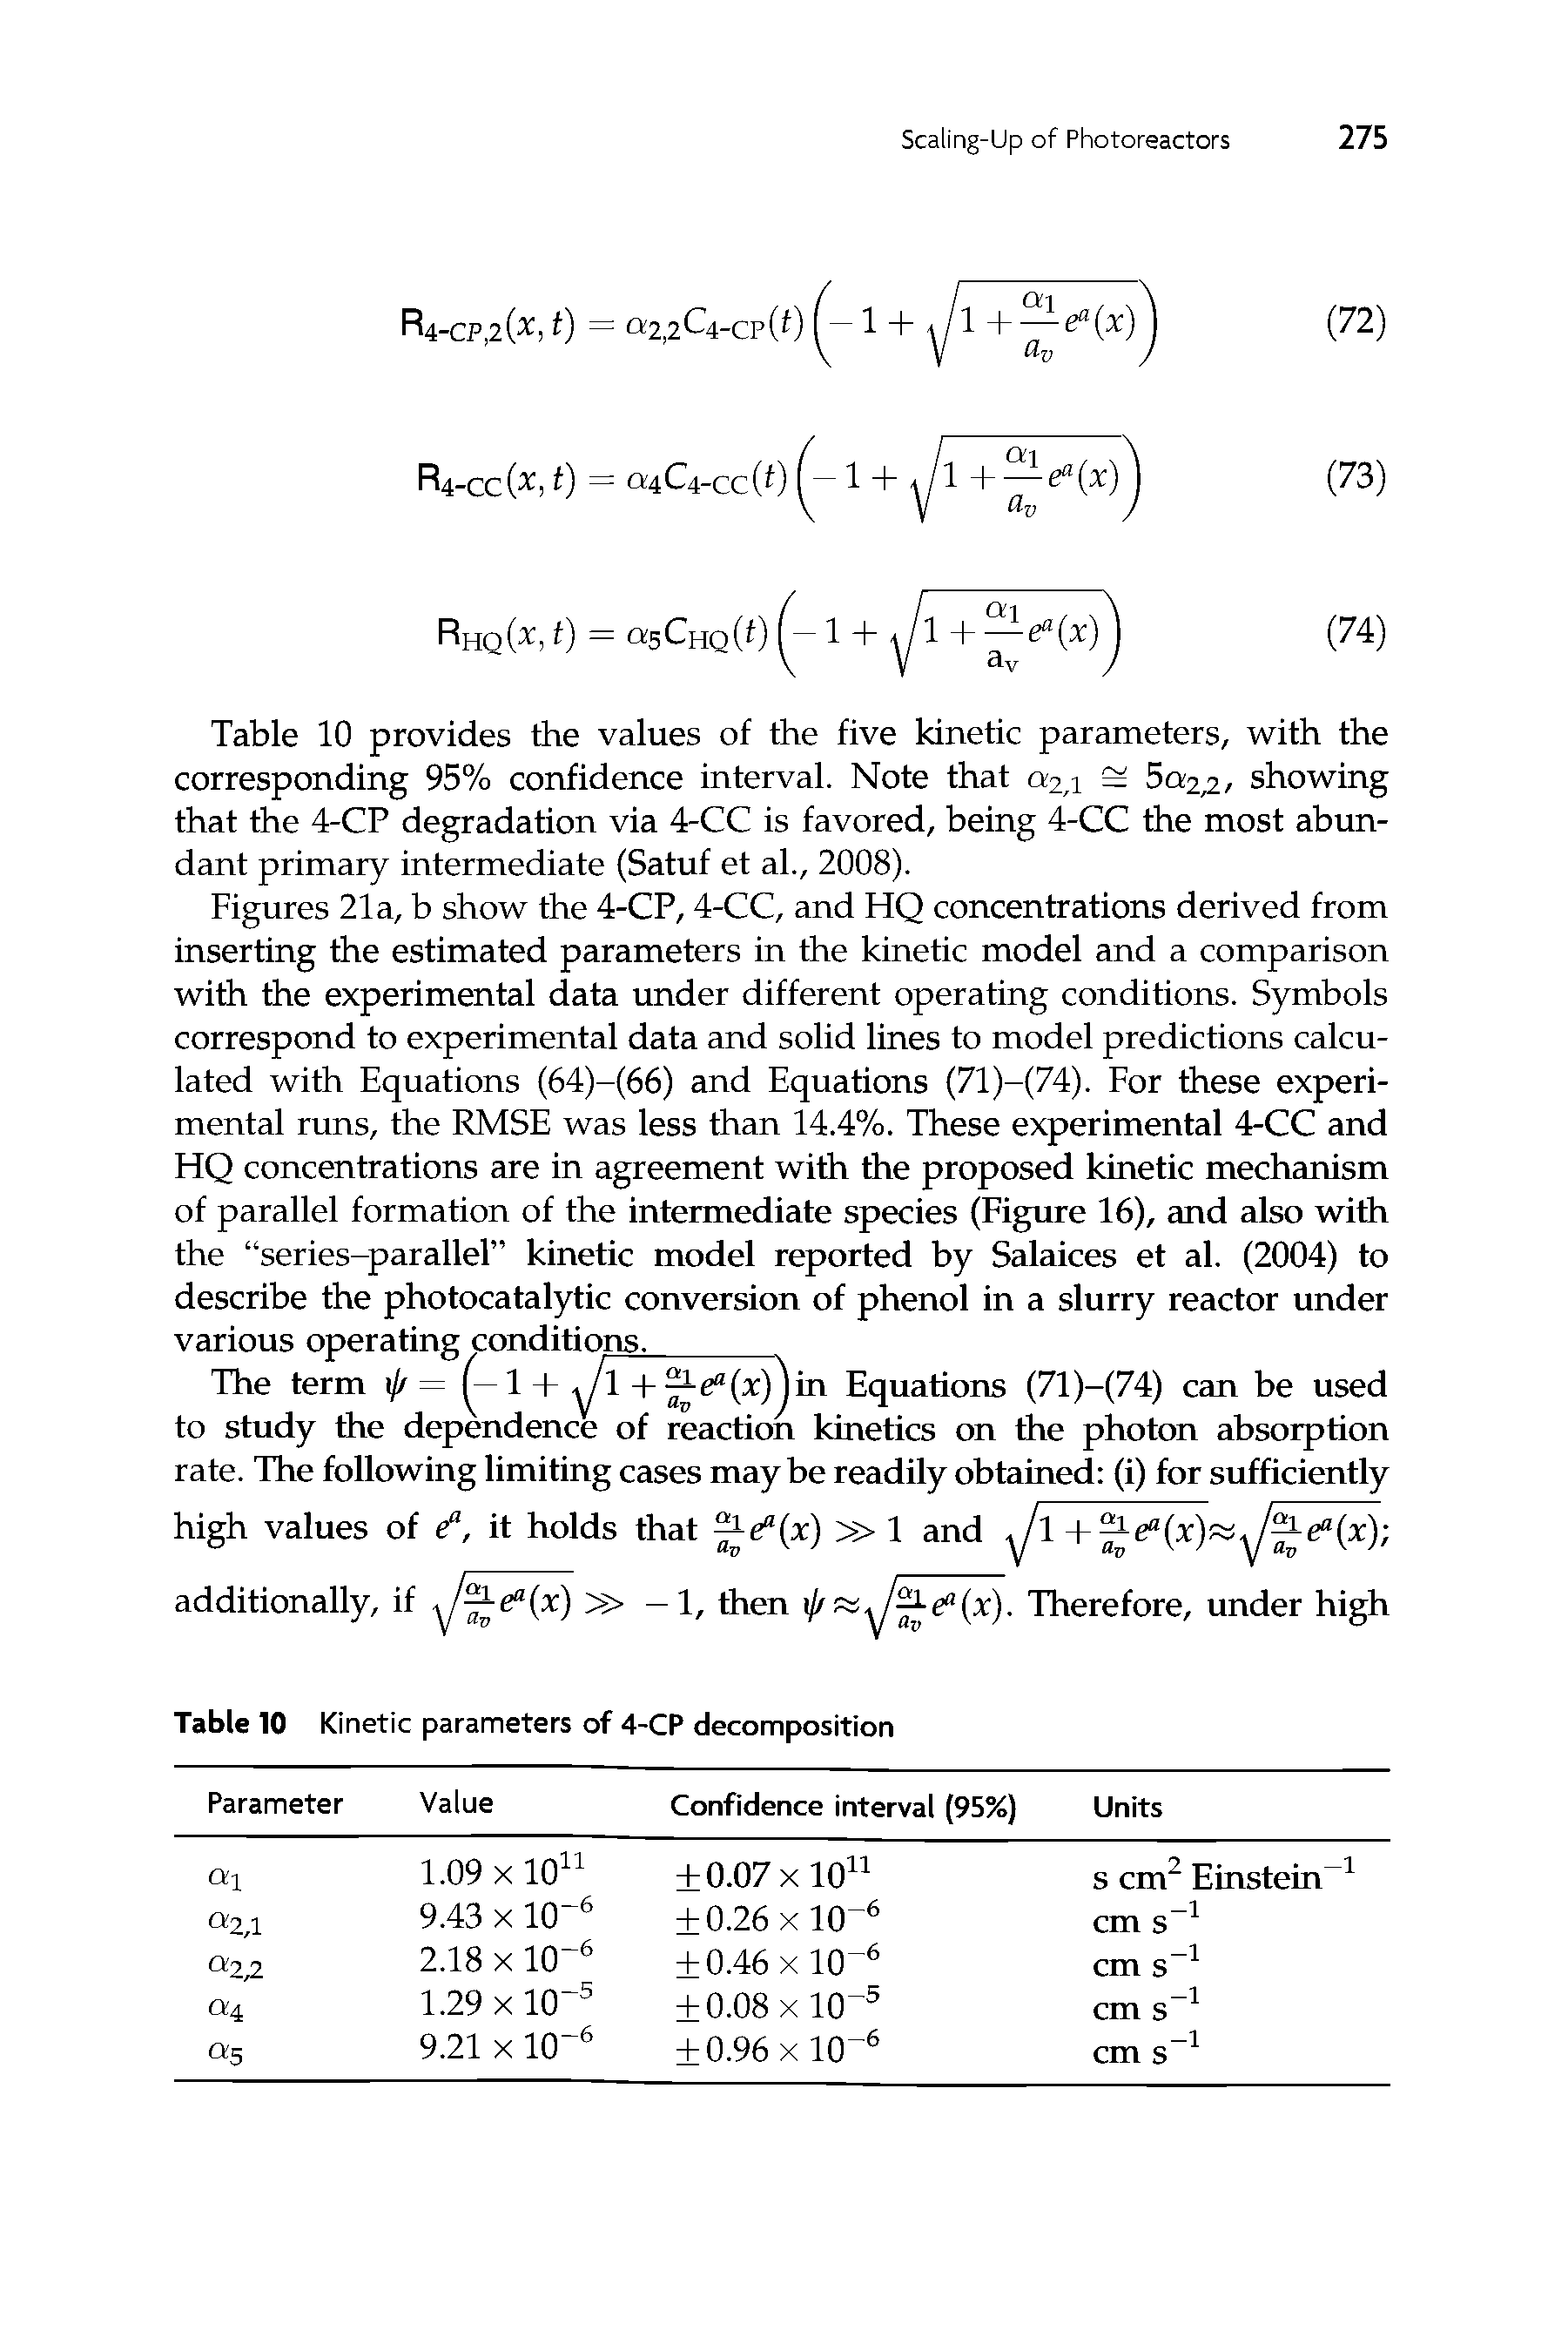 Figures 21a, b show the 4-CP, 4-CC, and HQ concentrations derived from inserting the estimated parameters in the kinetic model and a comparison with the experimental data under different operating conditions. Symbols correspond to experimental data and solid lines to model predictions calculated with Equations (64)-(66) and Equations (71)-(74). Eor these experimental runs, the RMSE was less than 14.4%. These experimental 4-CC and HQ concentrations are in agreement with the proposed kinetic mechanism of parallel formafion of fhe intermediate species (Figure 16), and also with the series-parallel kinetic model reported by Salaices et al. (2004) to describe the photocatalytic conversion of phenol in a slurry reactor under various operating conditions. ...